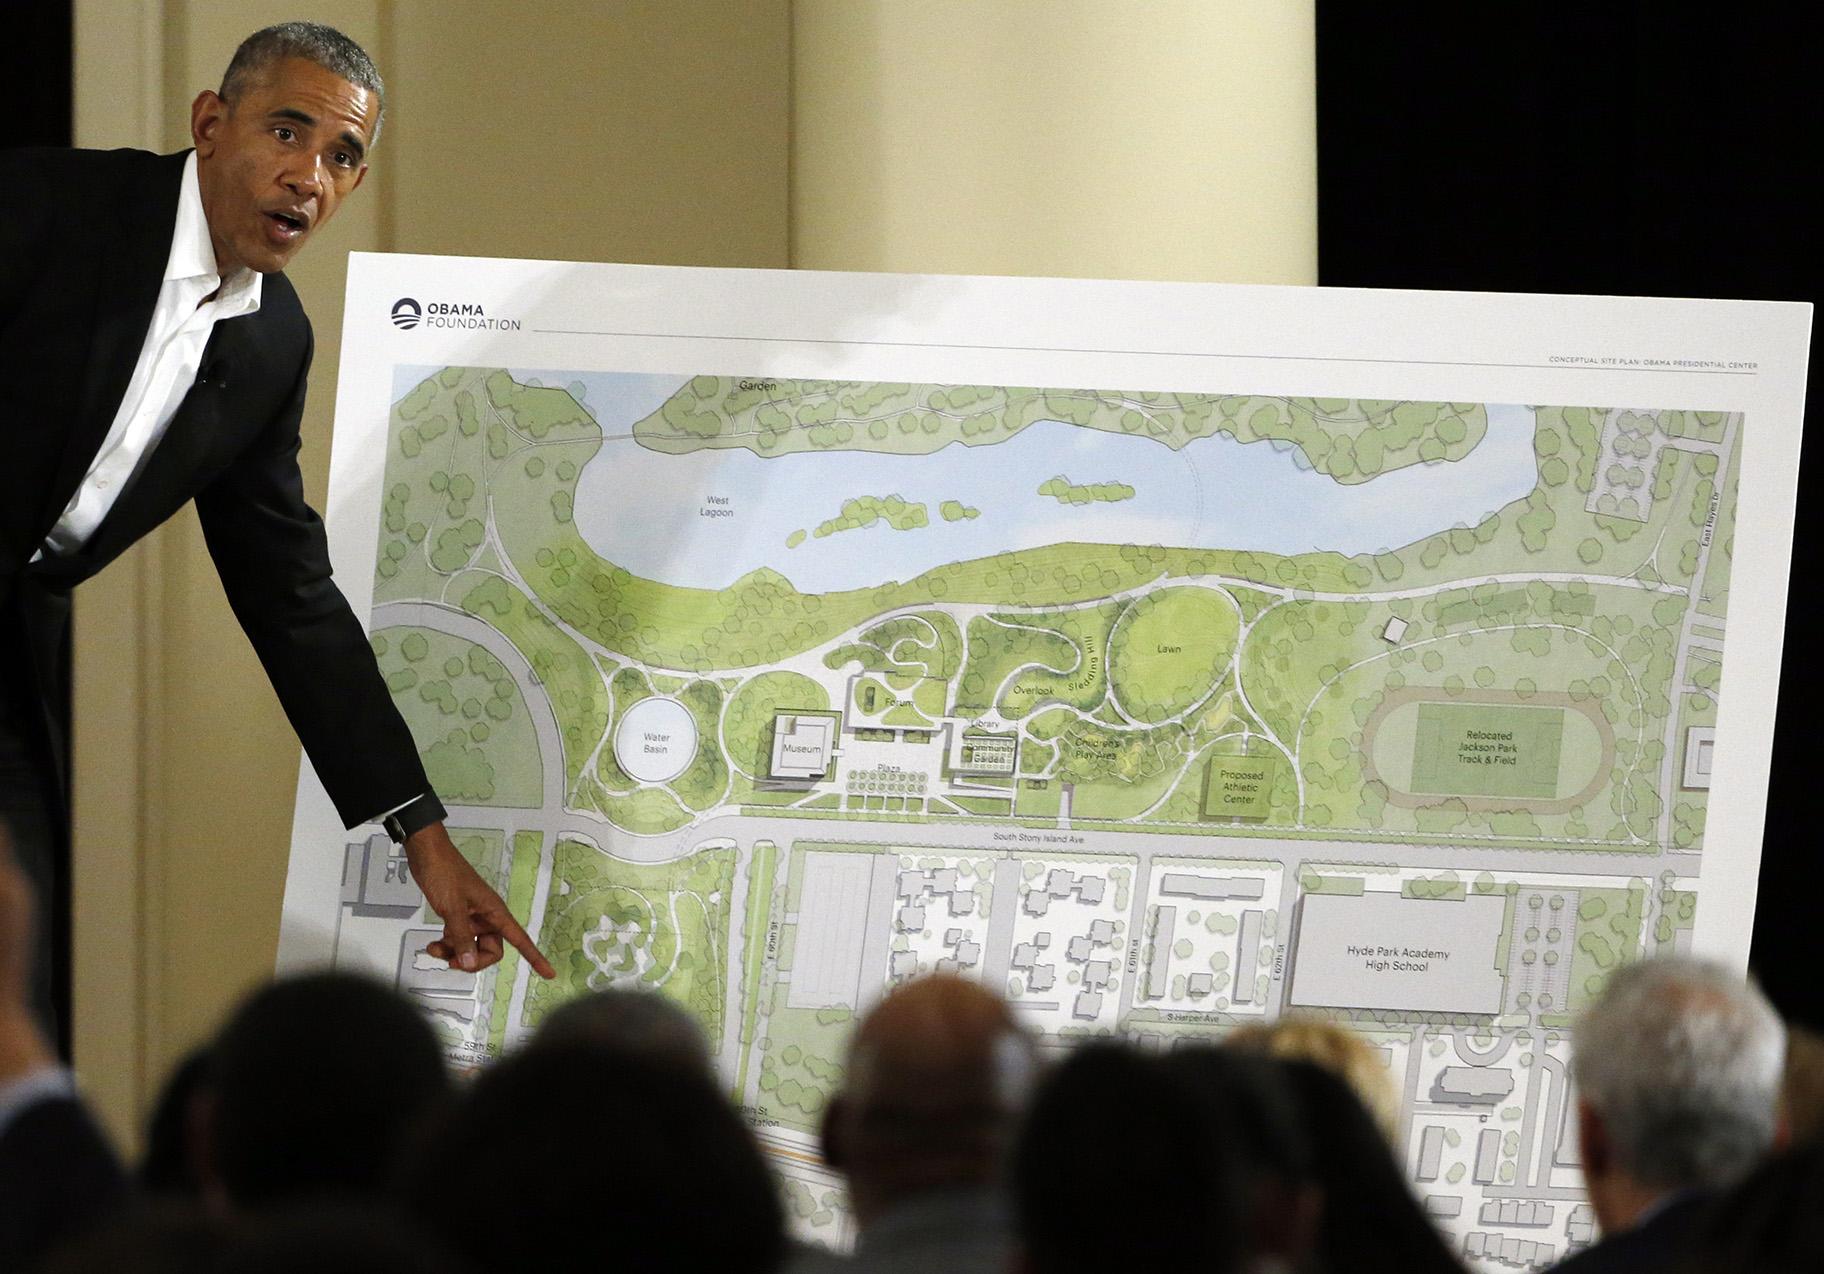 In this May 3, 2017 file photo, former President Barack Obama speaks at a community event on the Presidential Center at the South Shore Cultural Center in Chicago. (AP Photo / Nam Y. Huh, File)